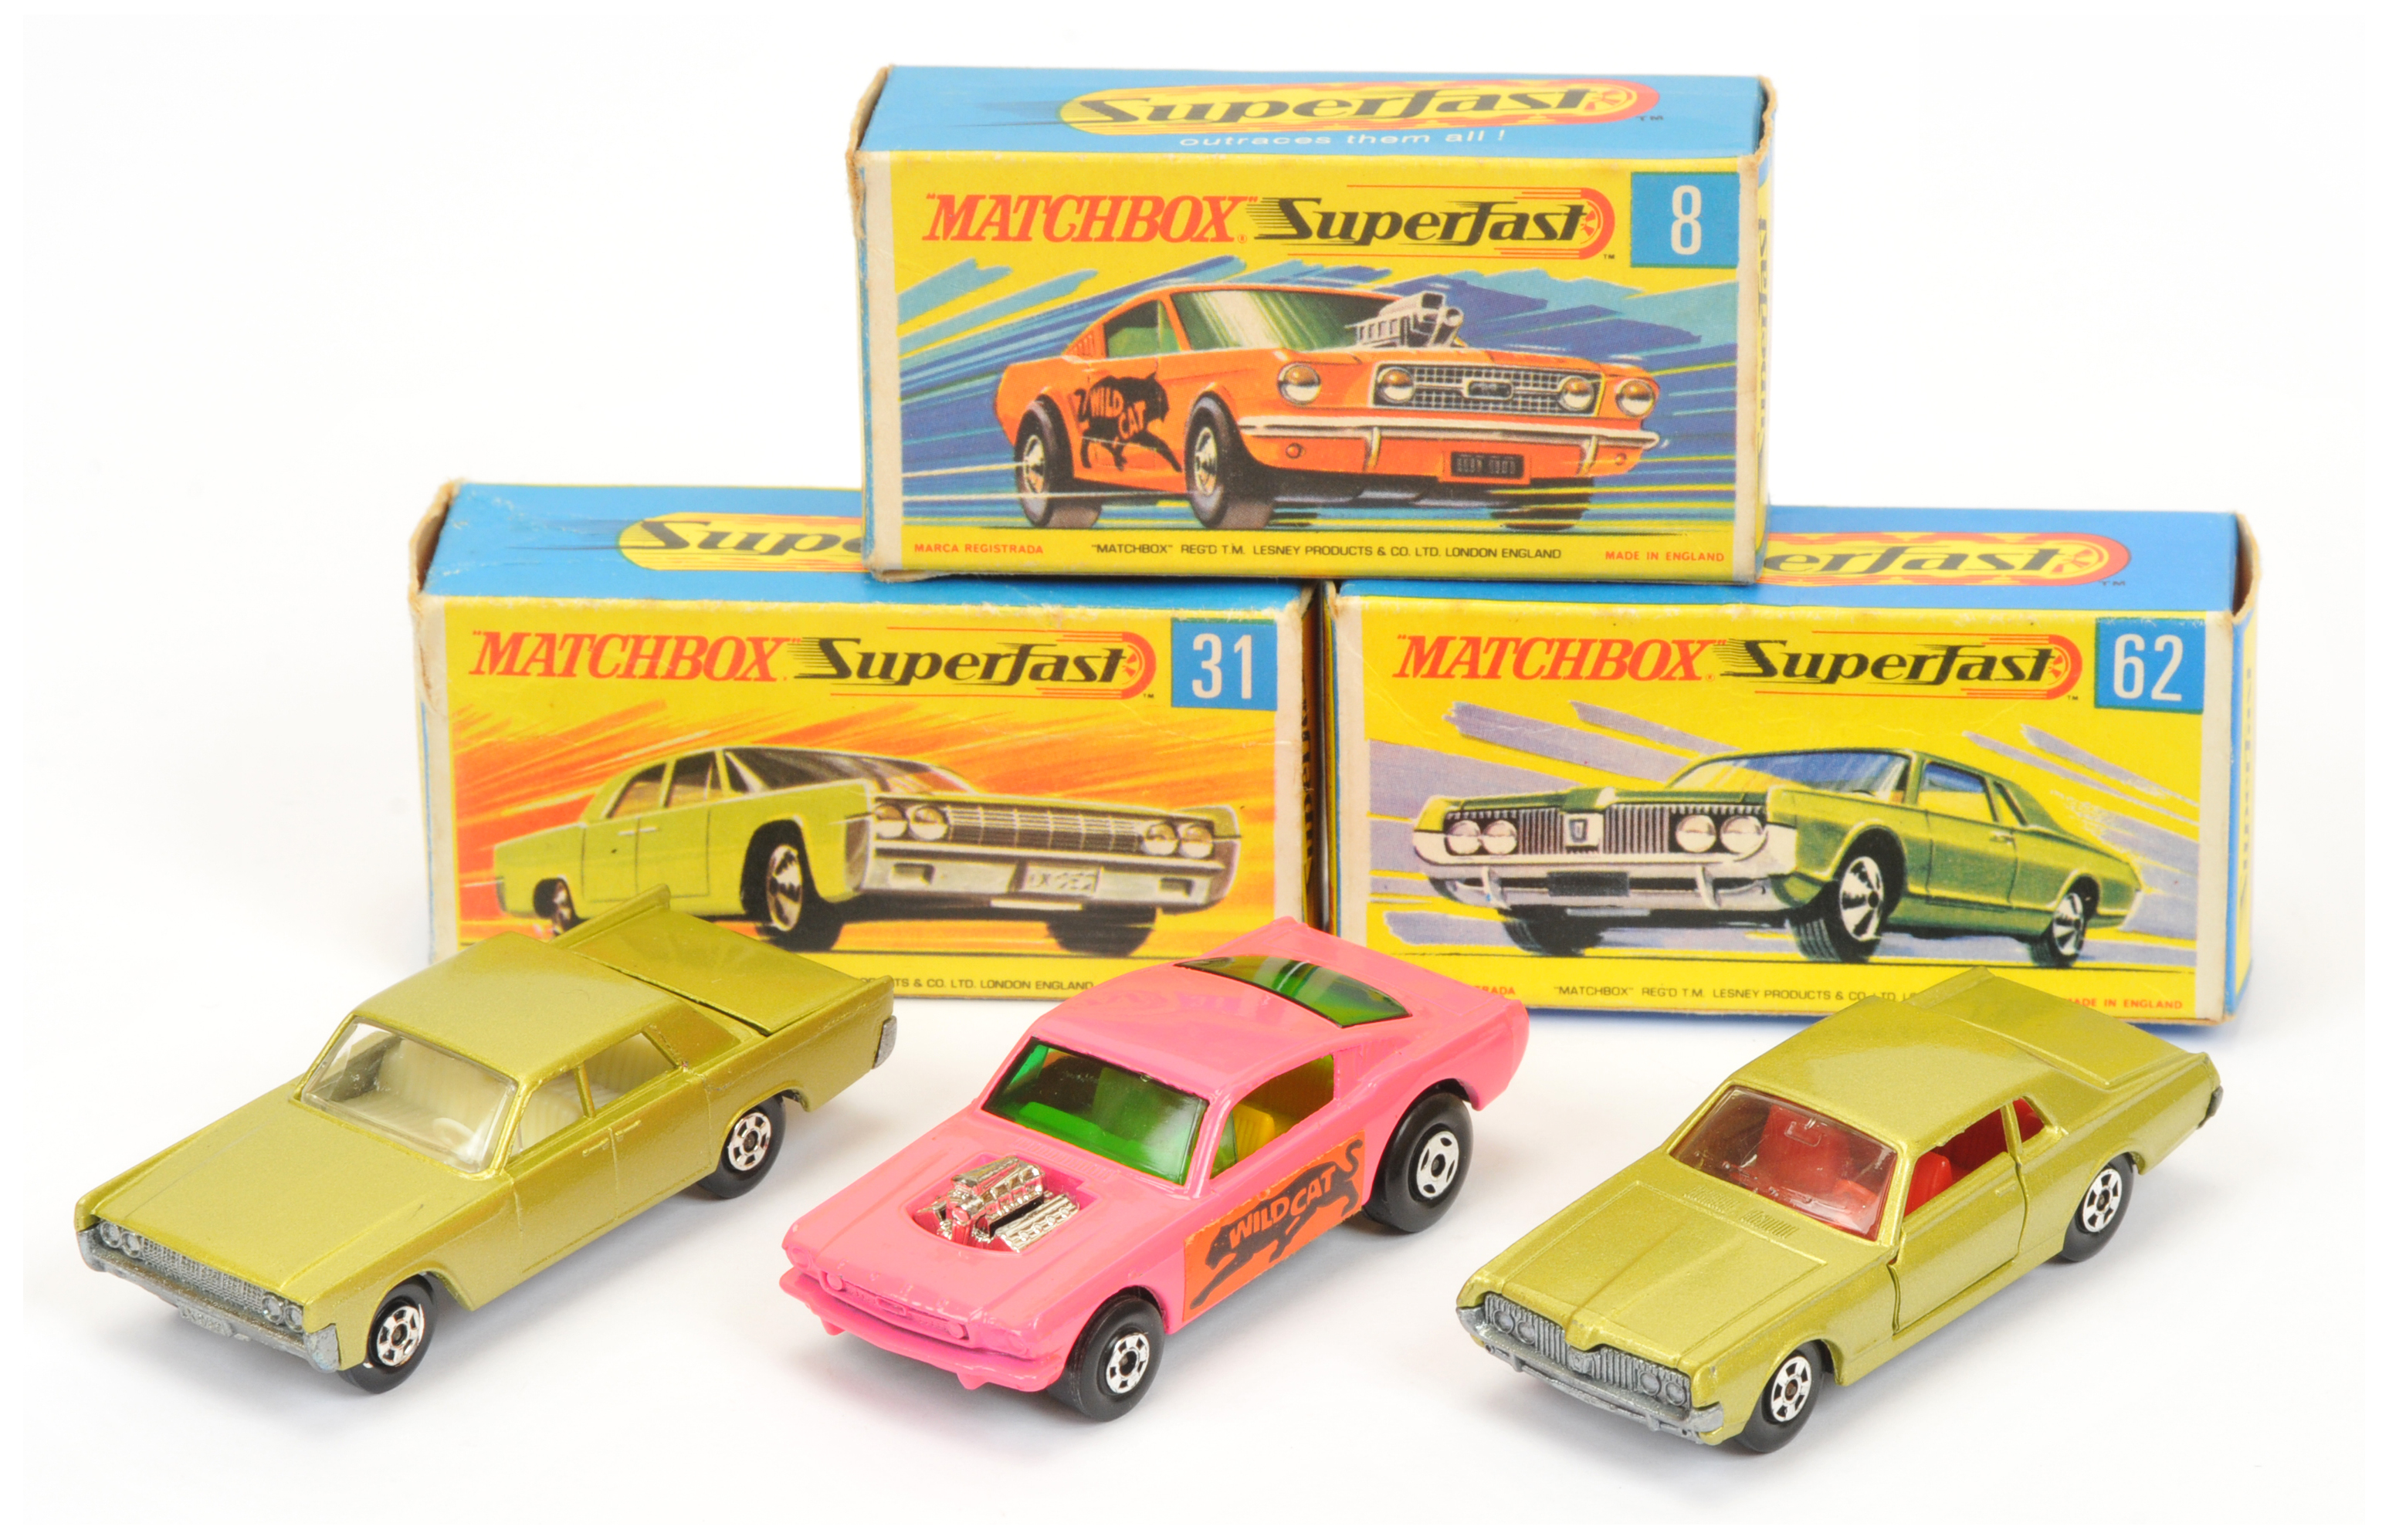 Matchbox Superfast  Group Of 3 - (1) 8b Ford Mustang Wildcat dragster - Pink body, black base, (2...